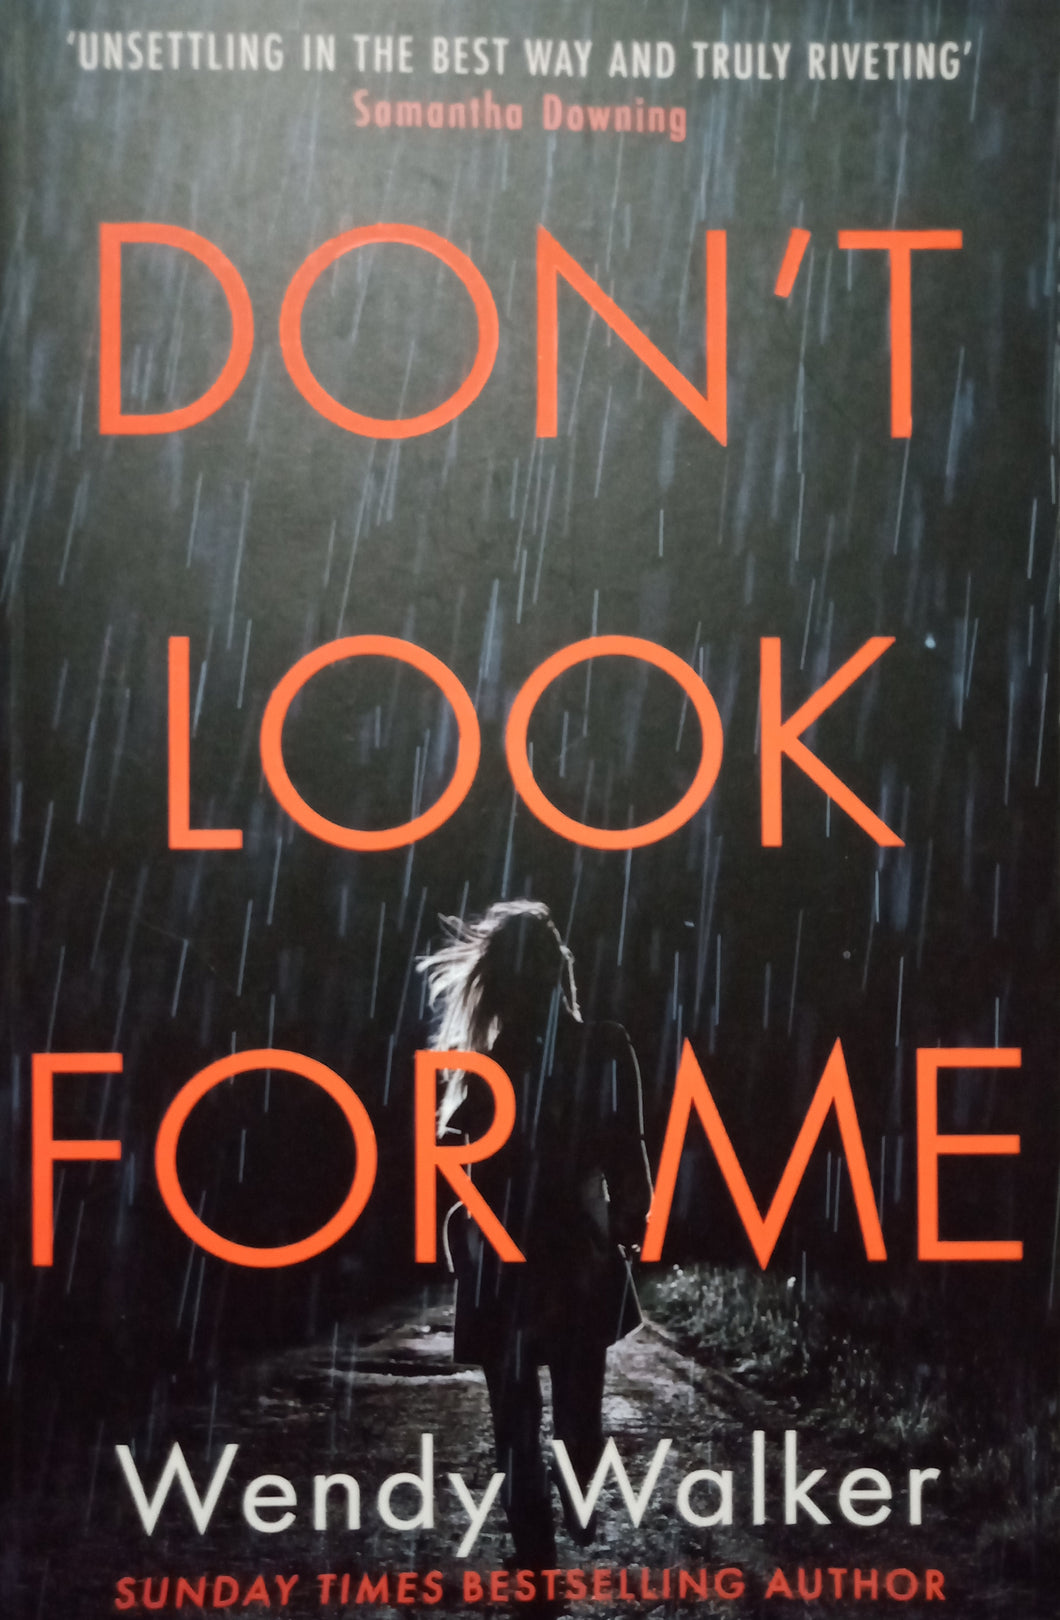 Don't Look For Me by Wendy Walker